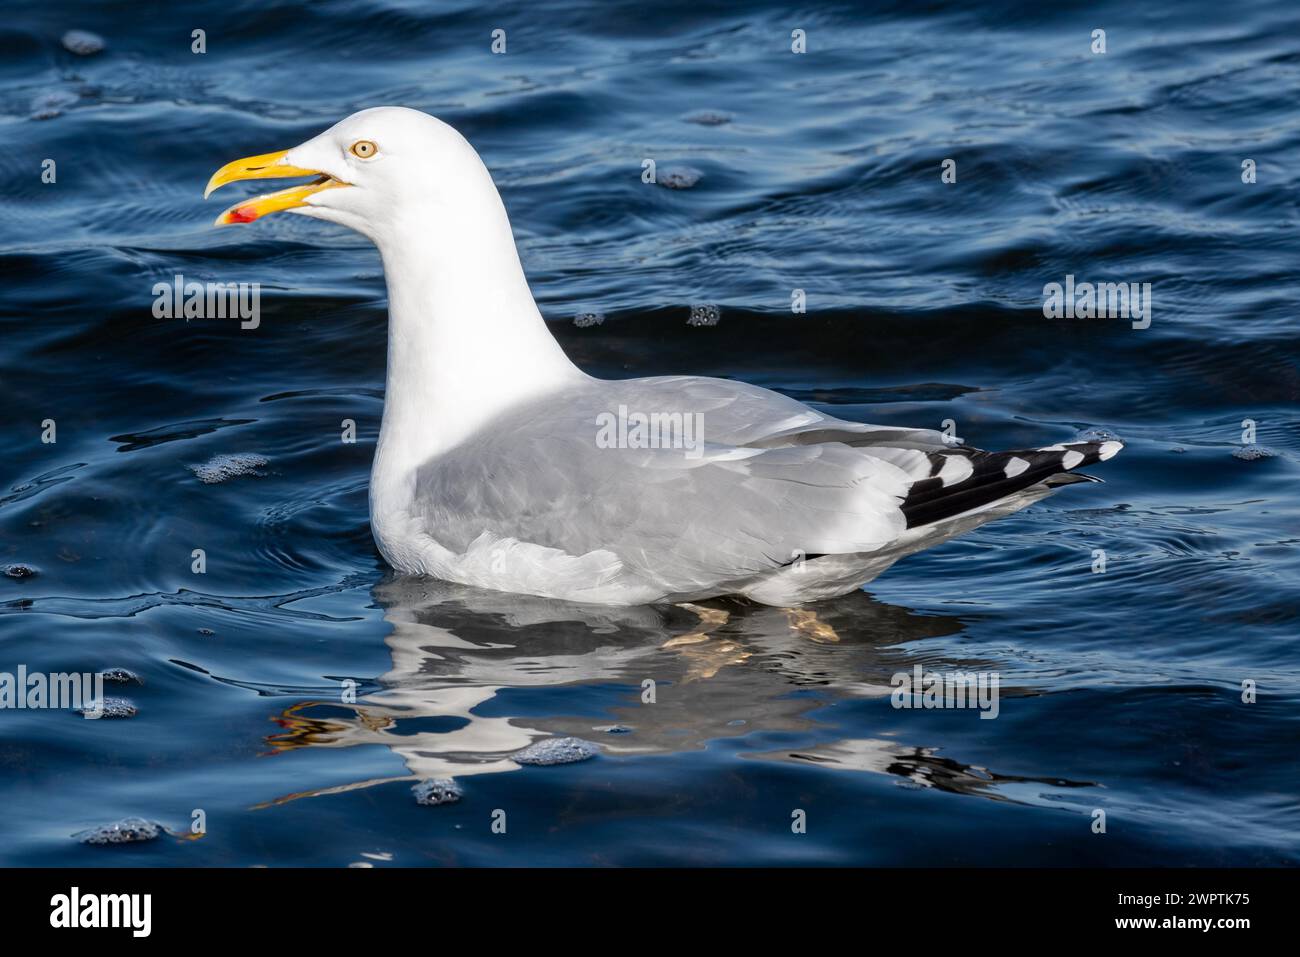 Close-up of a seagull on the water, with clearly visible yellow beak Stock Photo